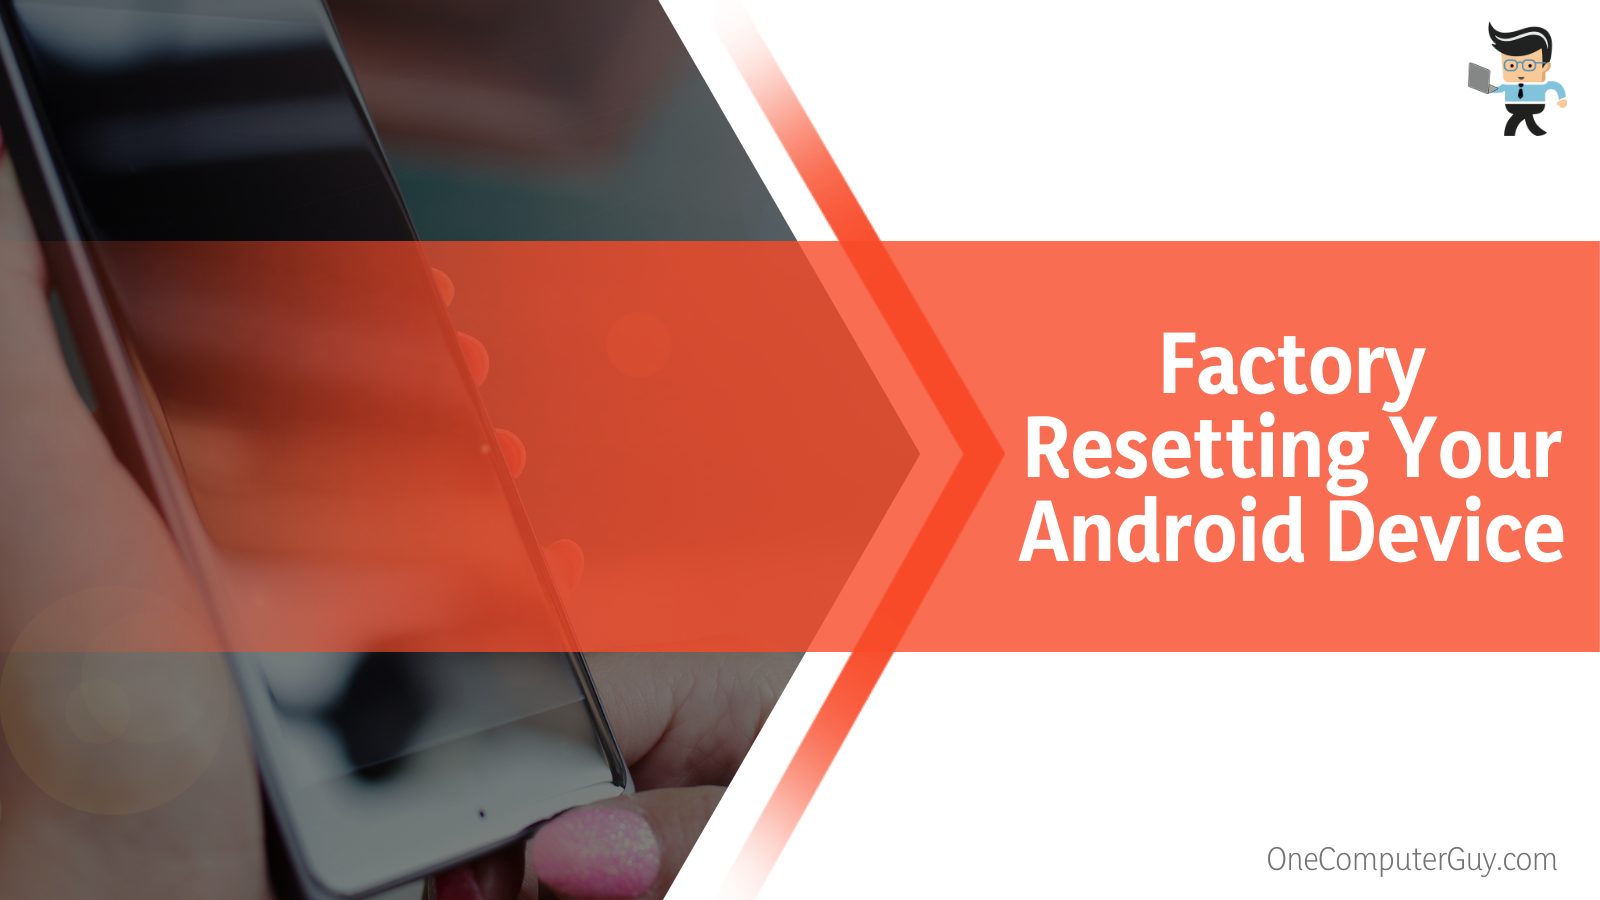 Factory Resetting Your Android Device